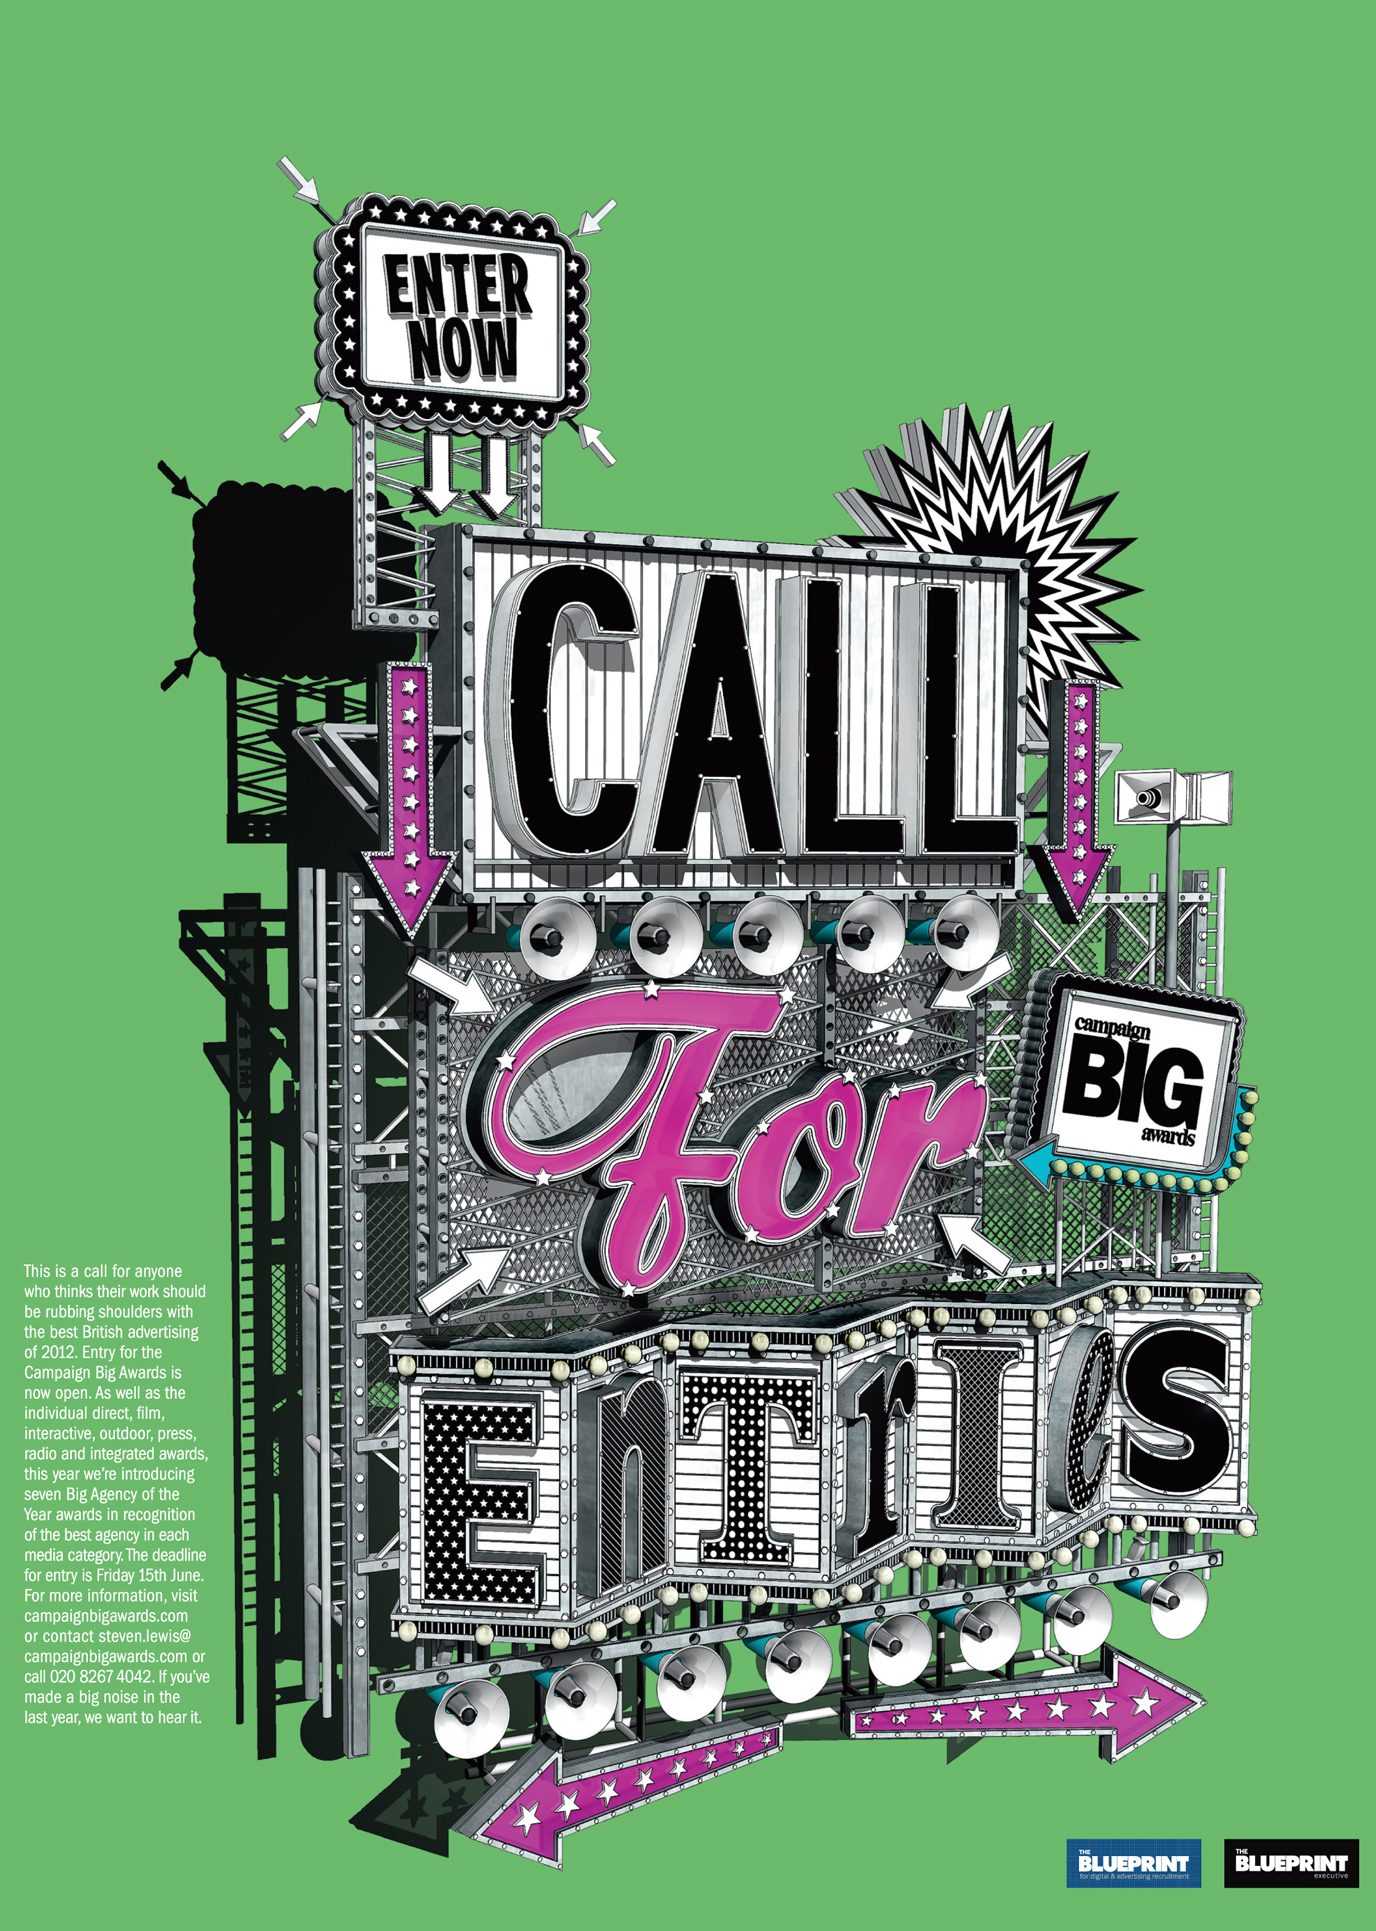 The Big Awards Call For Entries